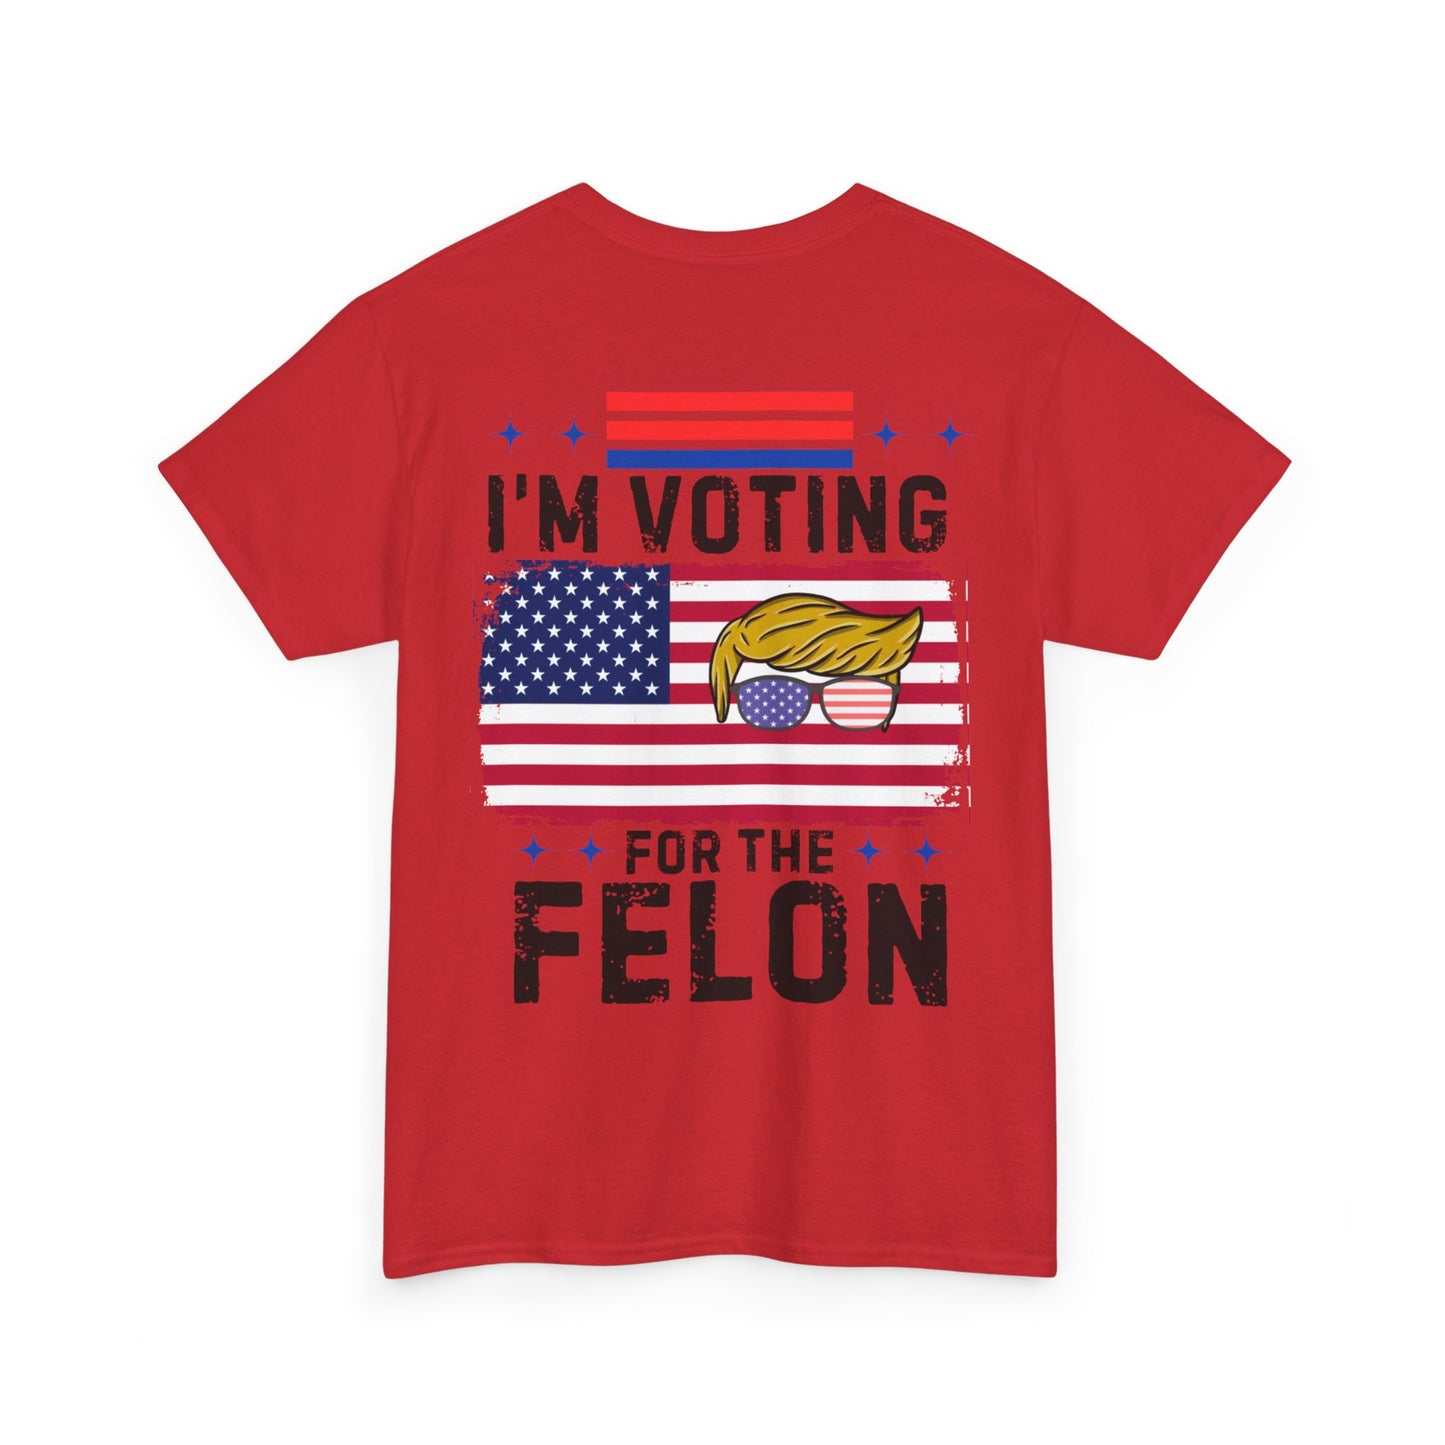 Get trendy with "I'm Voting for The Felon" Unisex Heavy Cotton Tee - T-Shirt available at Good Gift Company. Grab yours for $17 today!